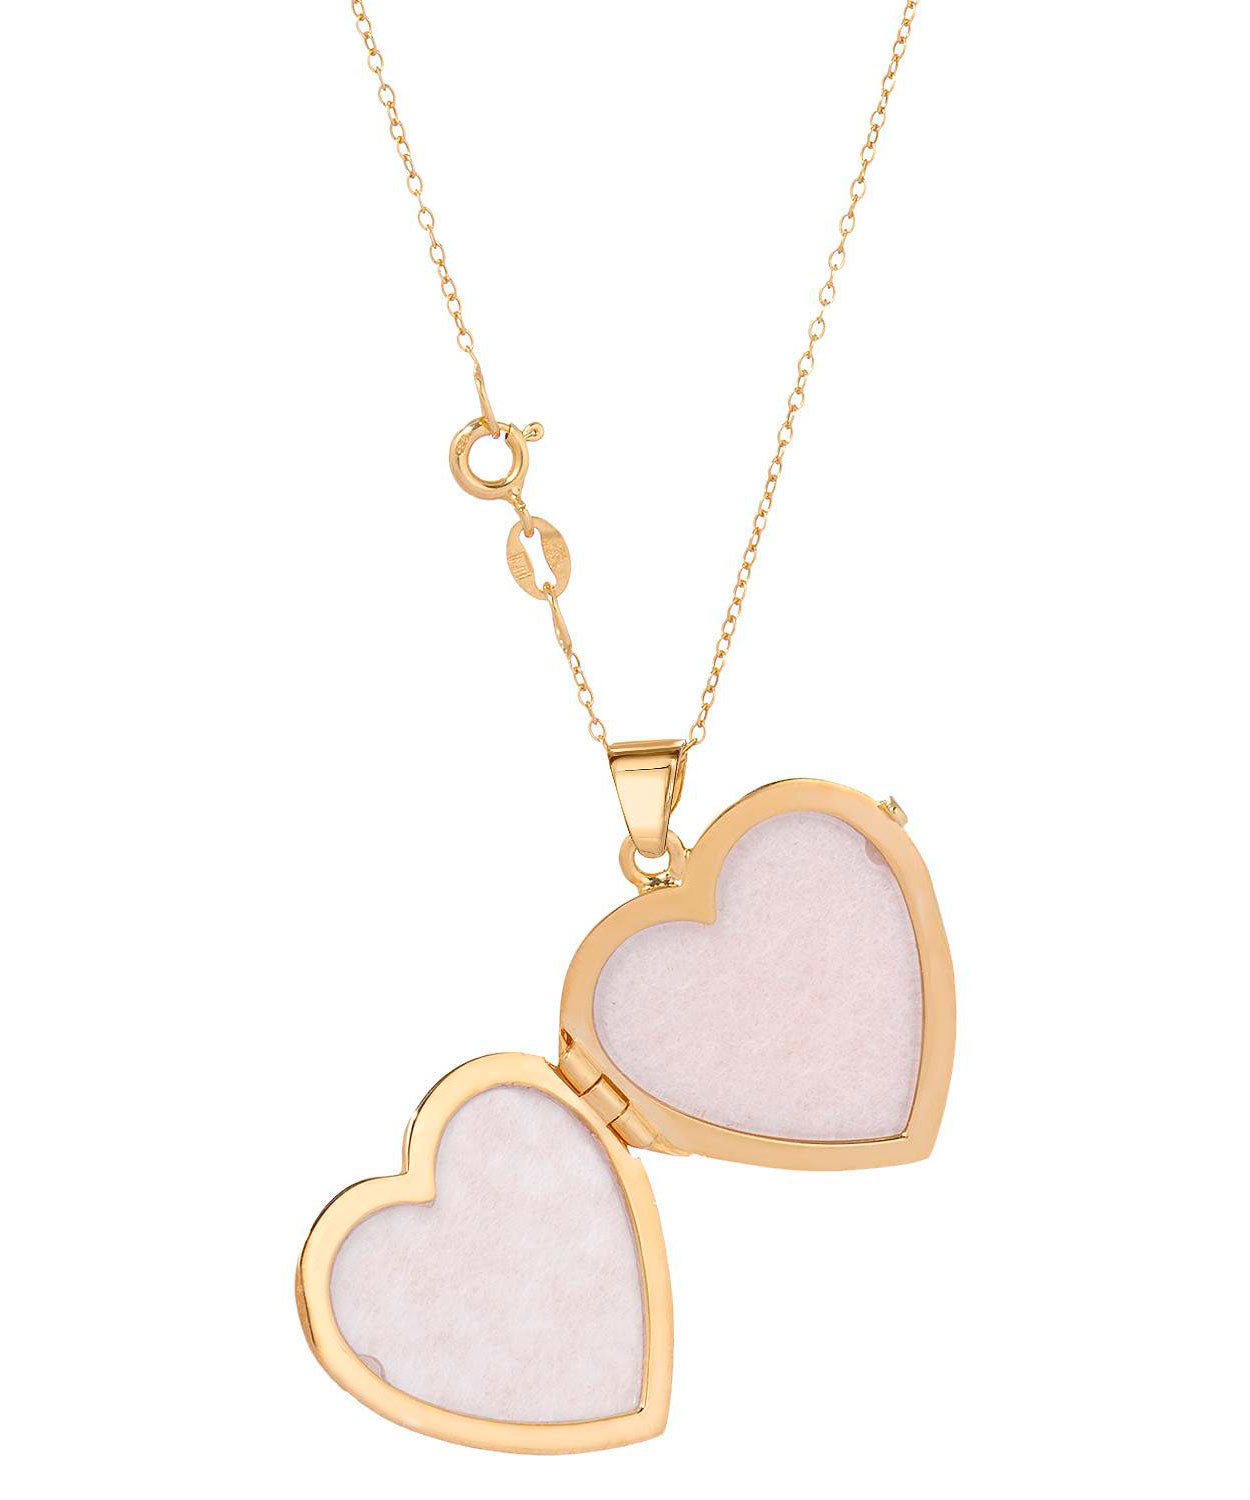 Patterns of Love Collection 14k Gold Plated 925 Sterling Silver Heart Locket Pendant With Chain - Made in Italy View 2